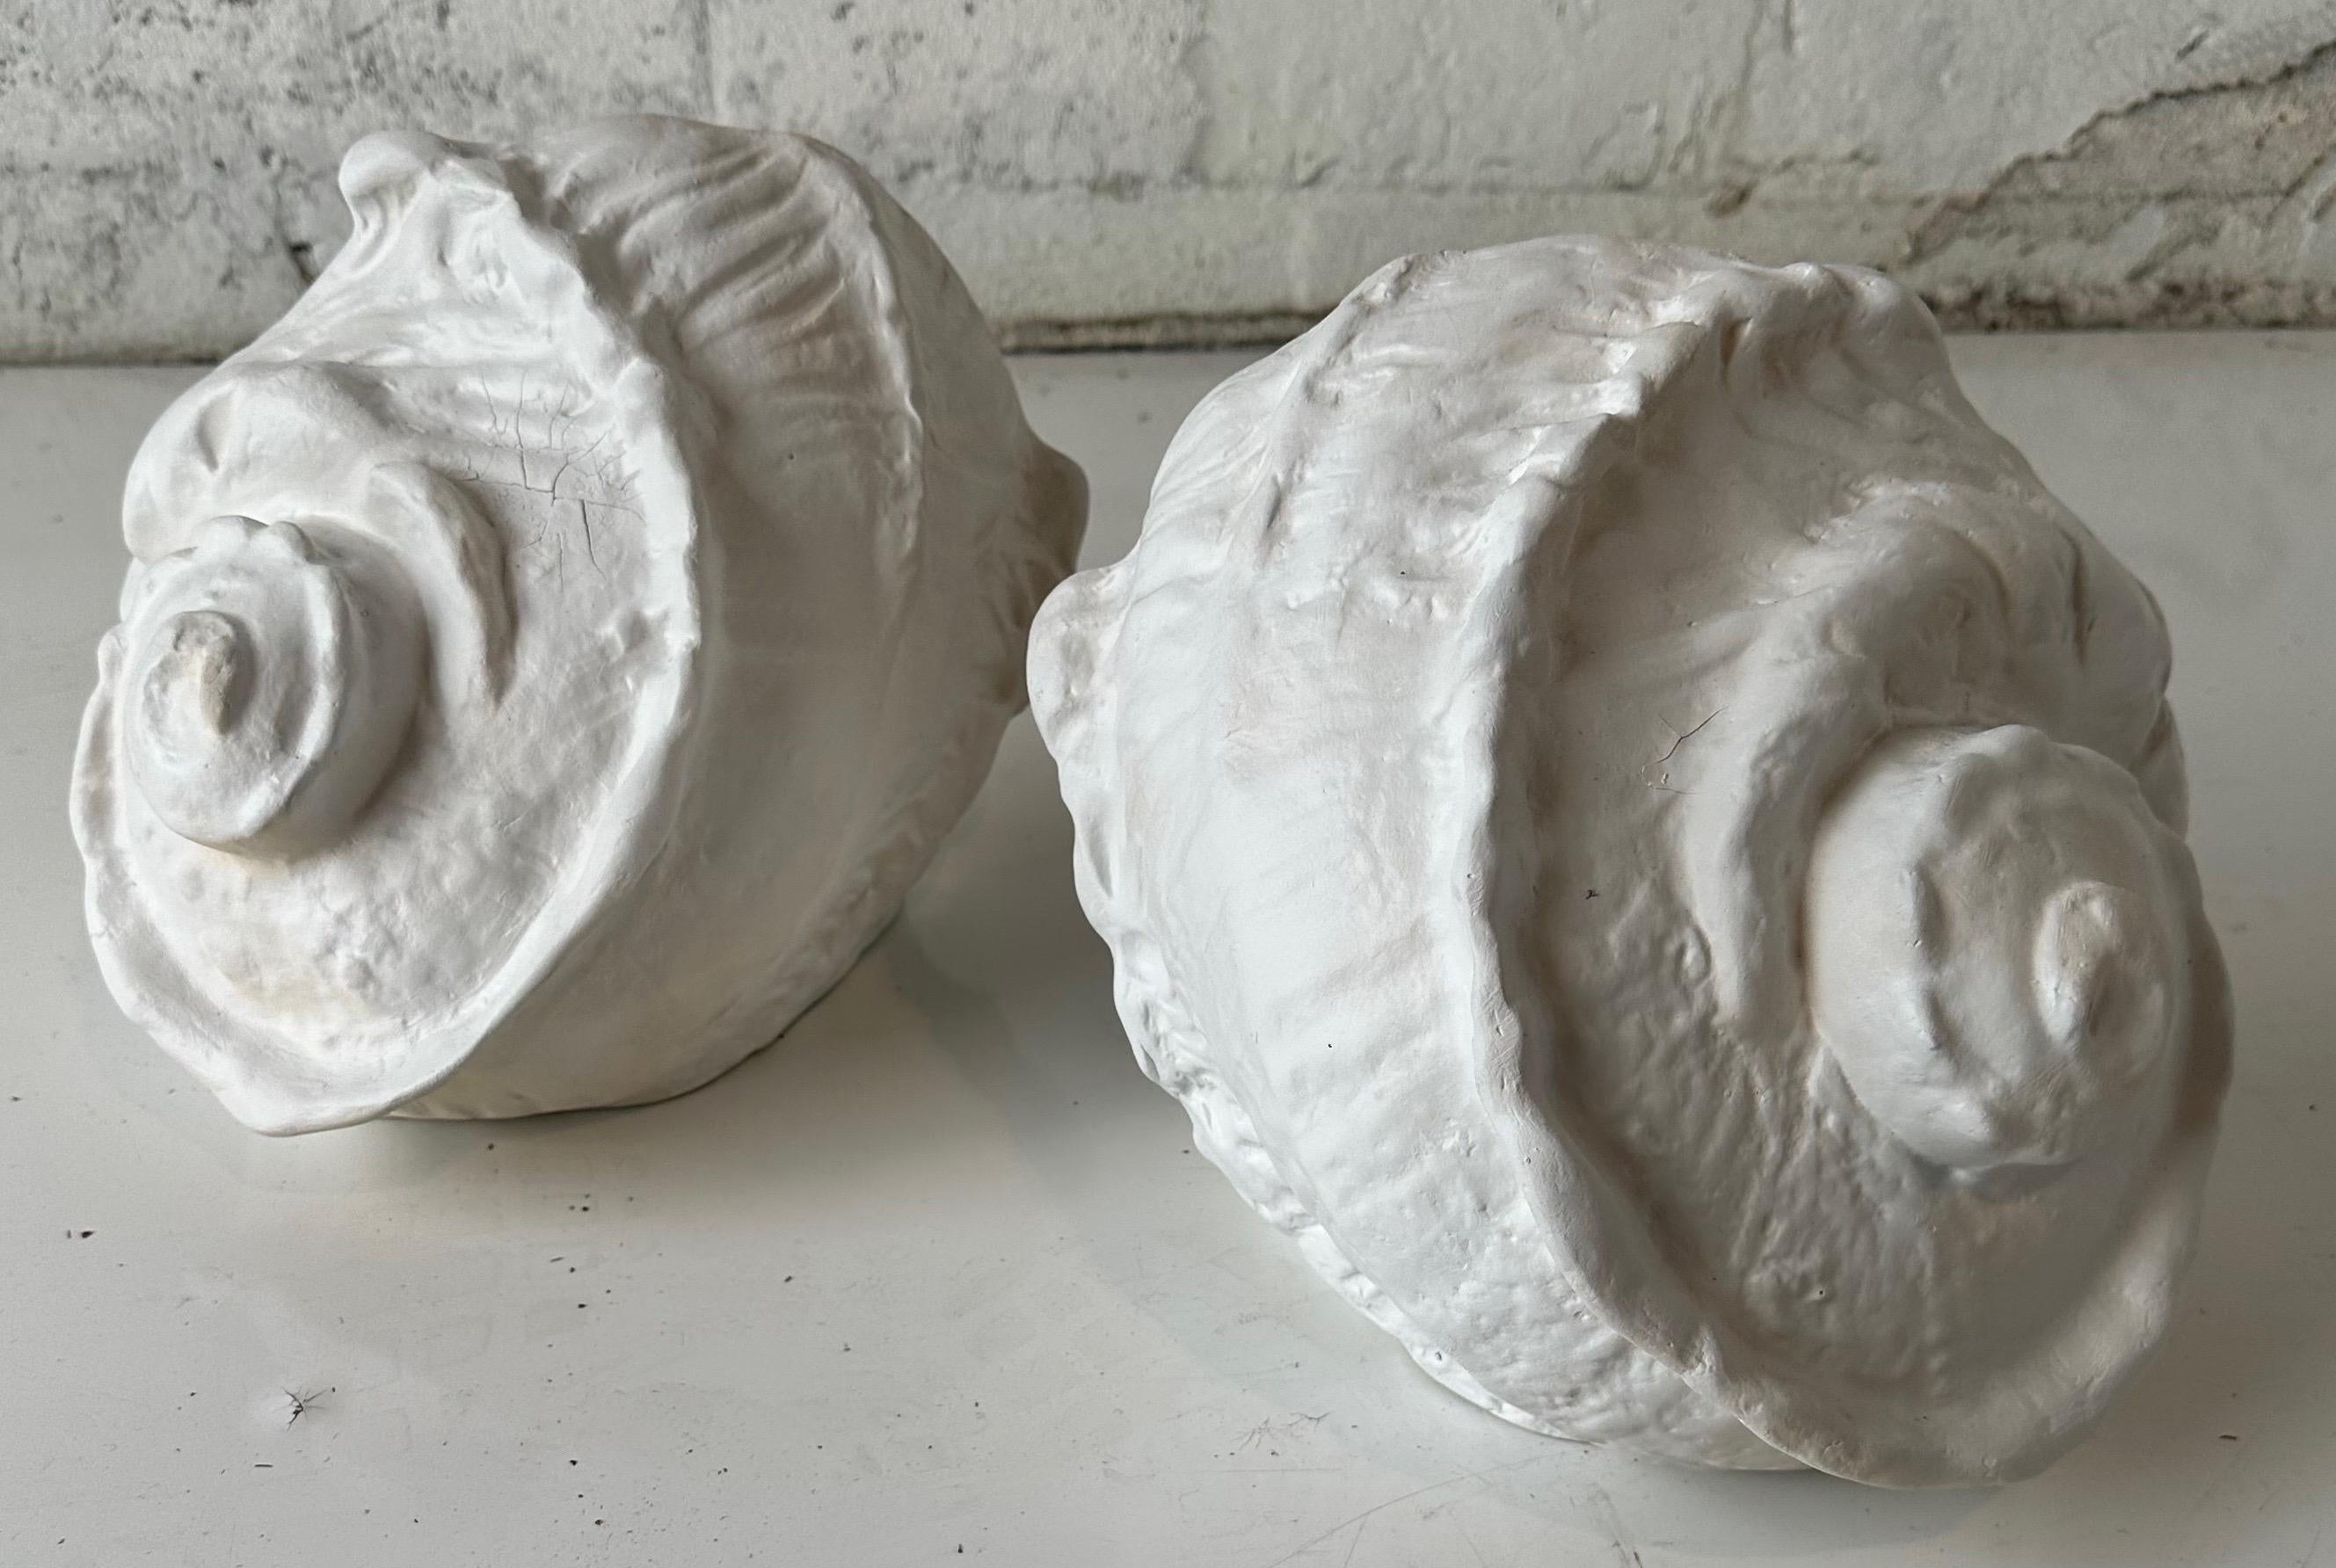 Pair of Conch plaster sconces in the style of Serge Roche.
Original condition.
US rewired, one socket, 13 watts LED.